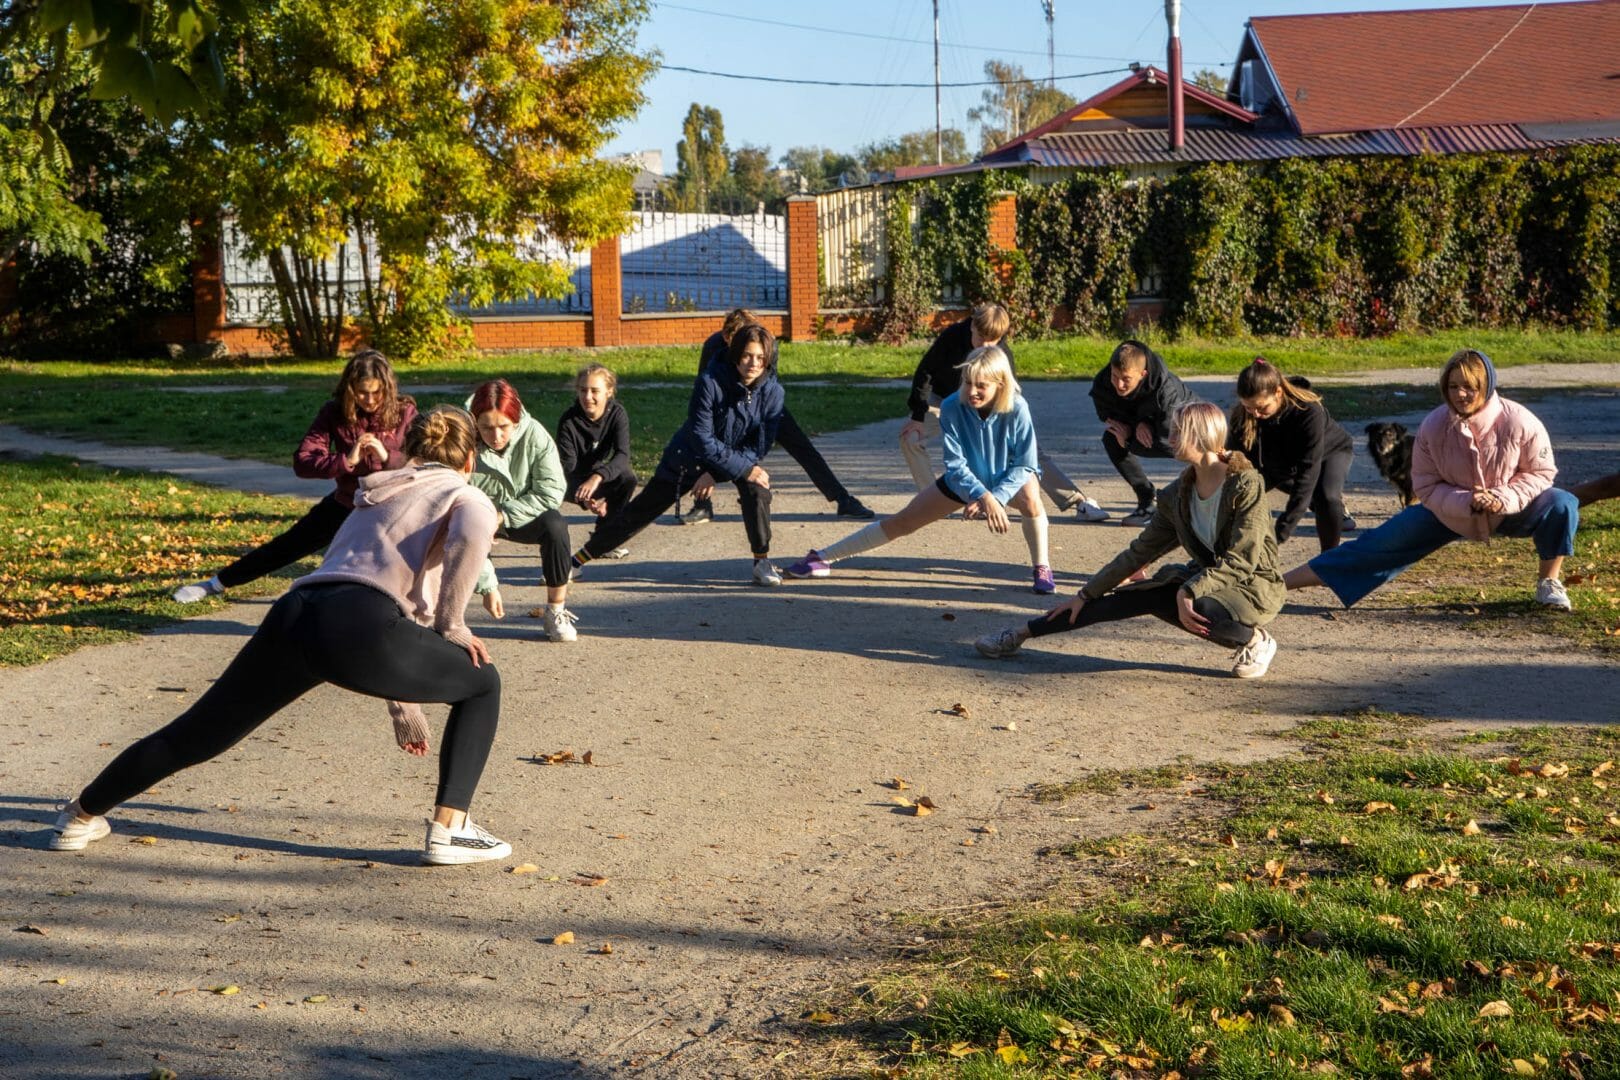 Pupils of a local school have physical education classes in the park. 